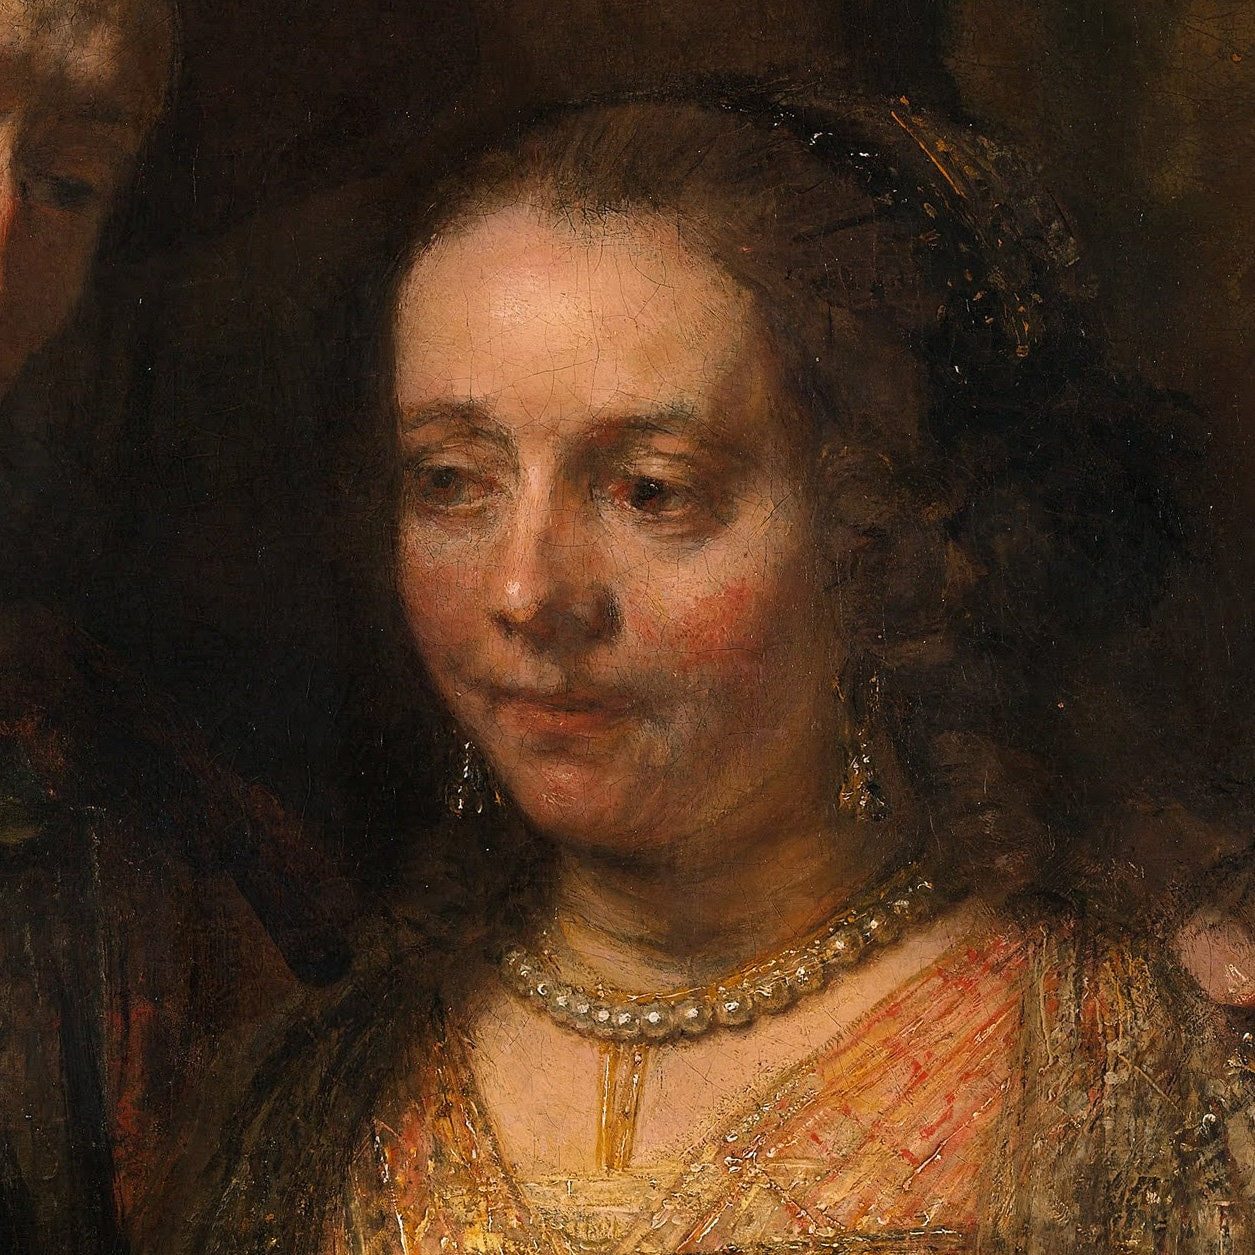 Isaac and Rebecca by Rembrandt, 3d Printed with texture and brush strokes looks like original oil-painting, code:344